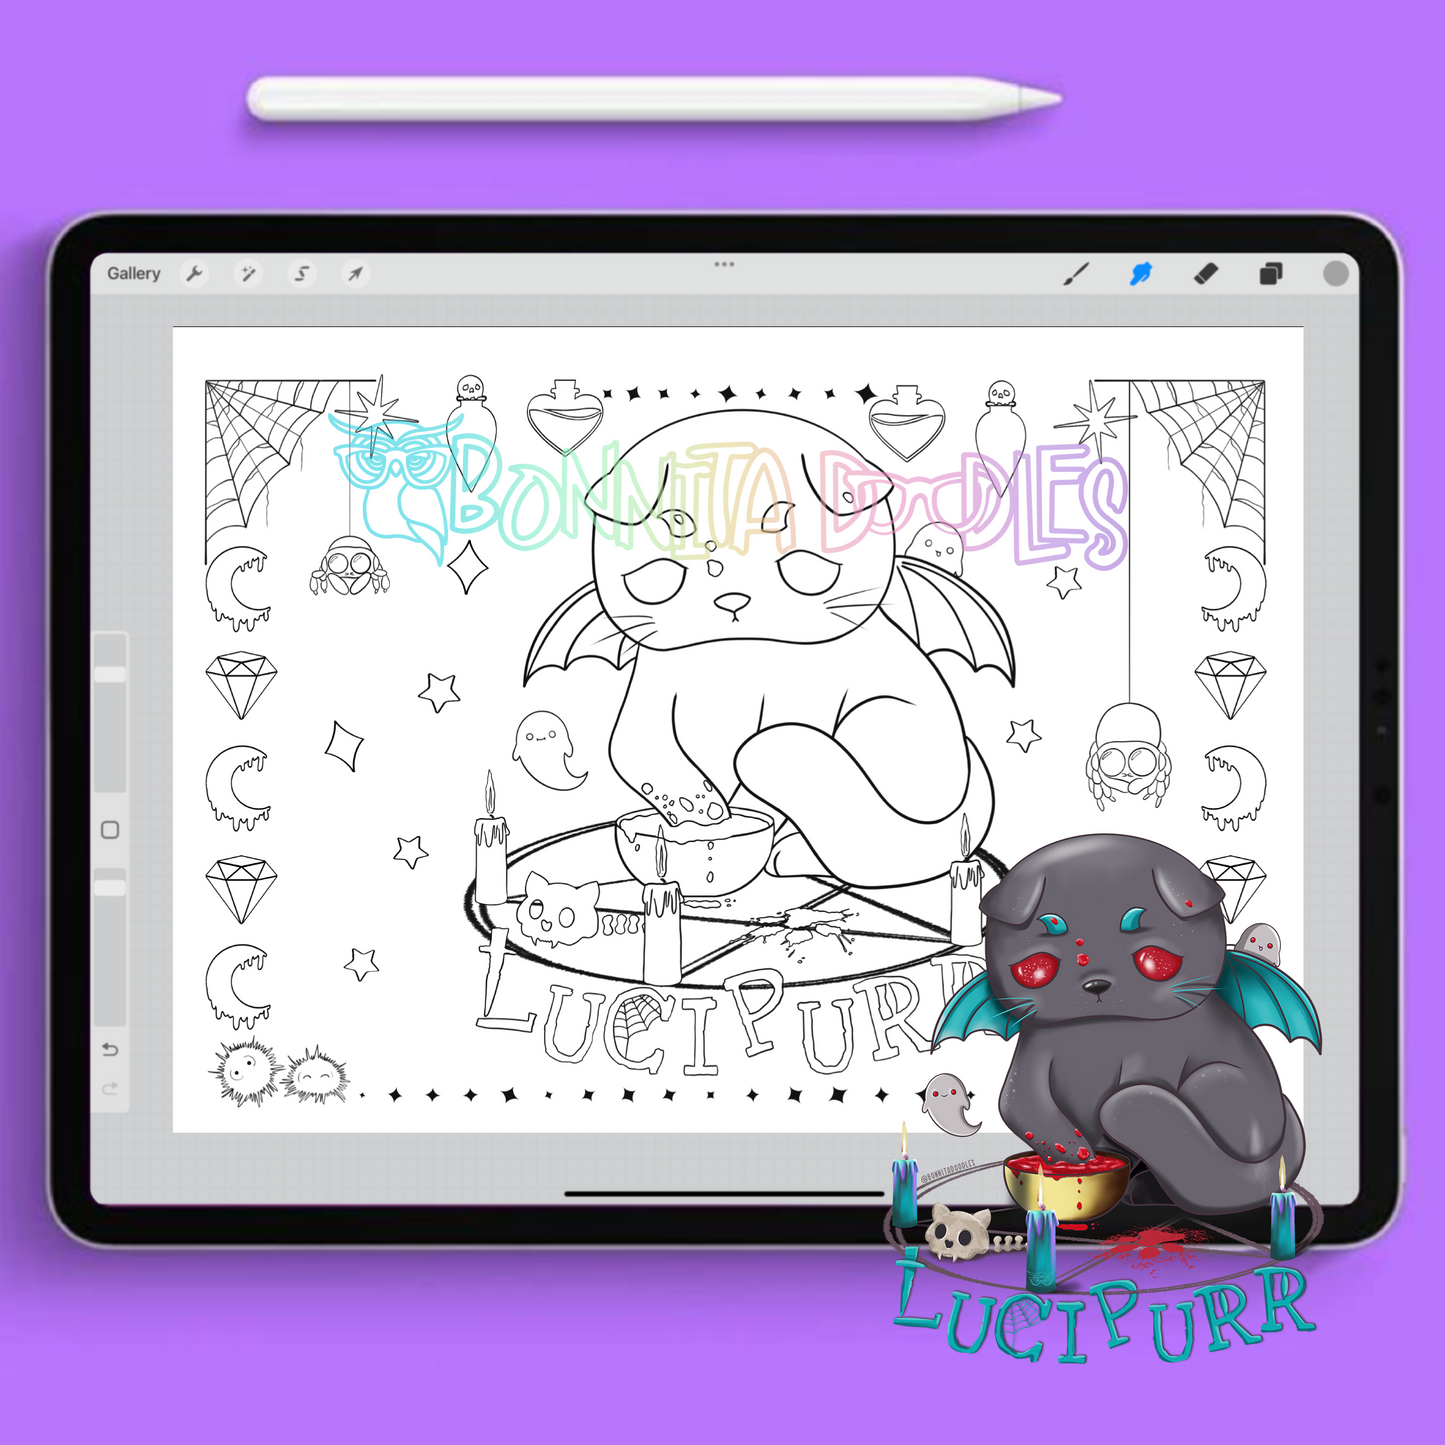 Lucipurr cat colouring sheet from Bonnita Doodles, shown with the full colour inspiration for creative colouring